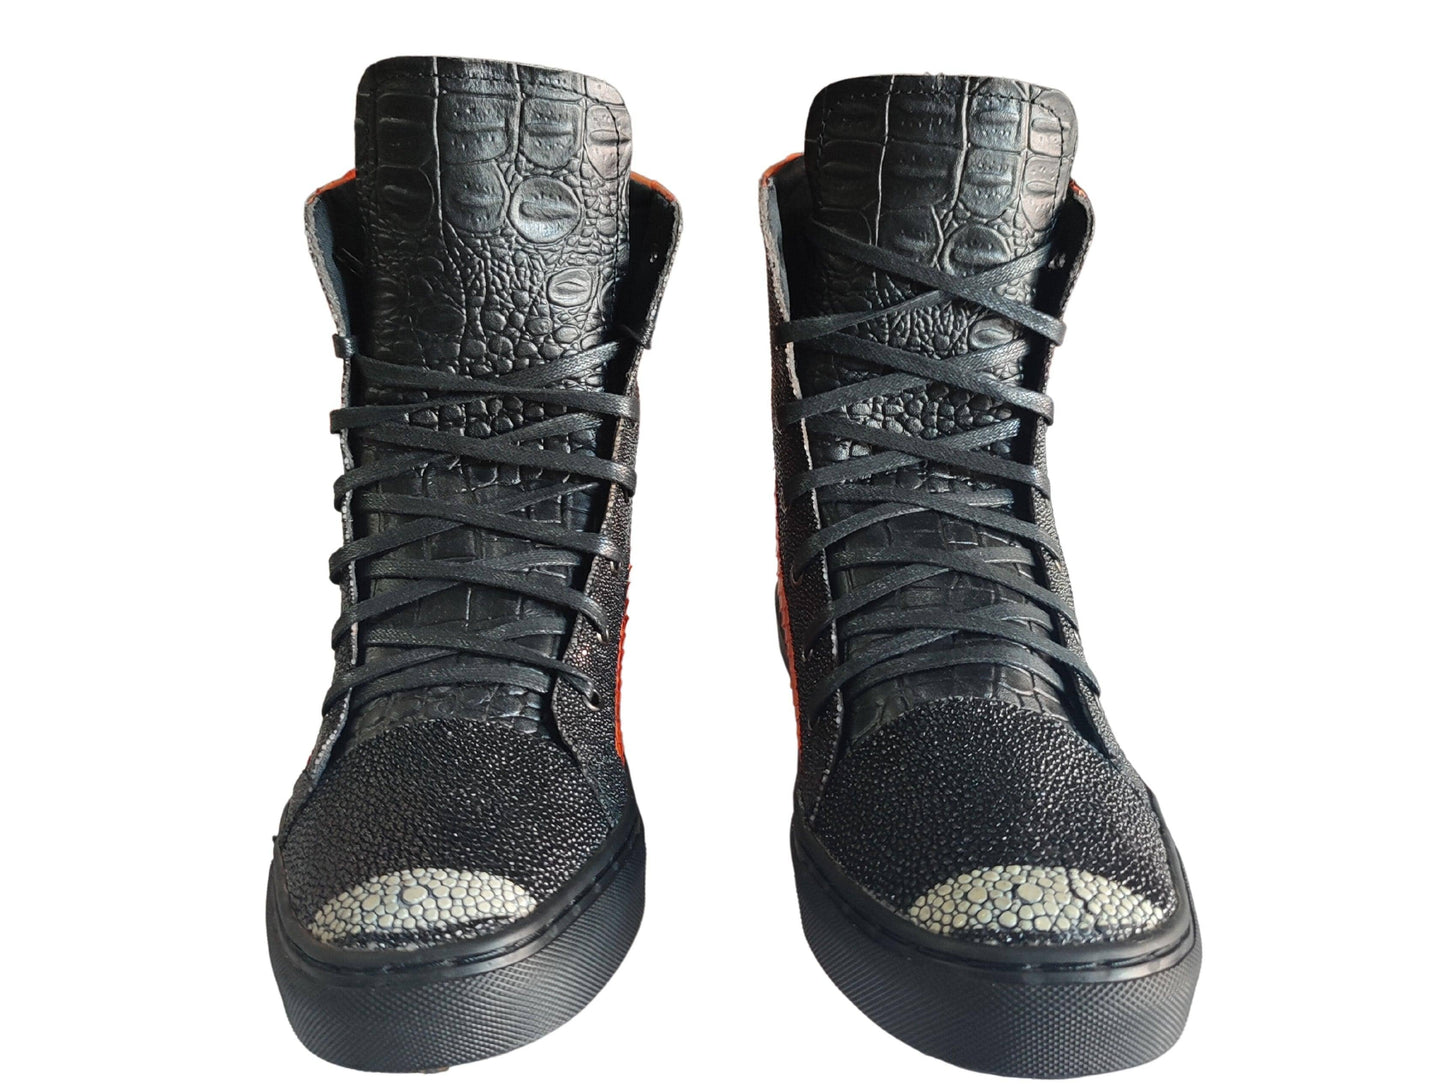 Shoes Snakeskin Sneaker Boots Shoes Python Jacket by LFM Fashion